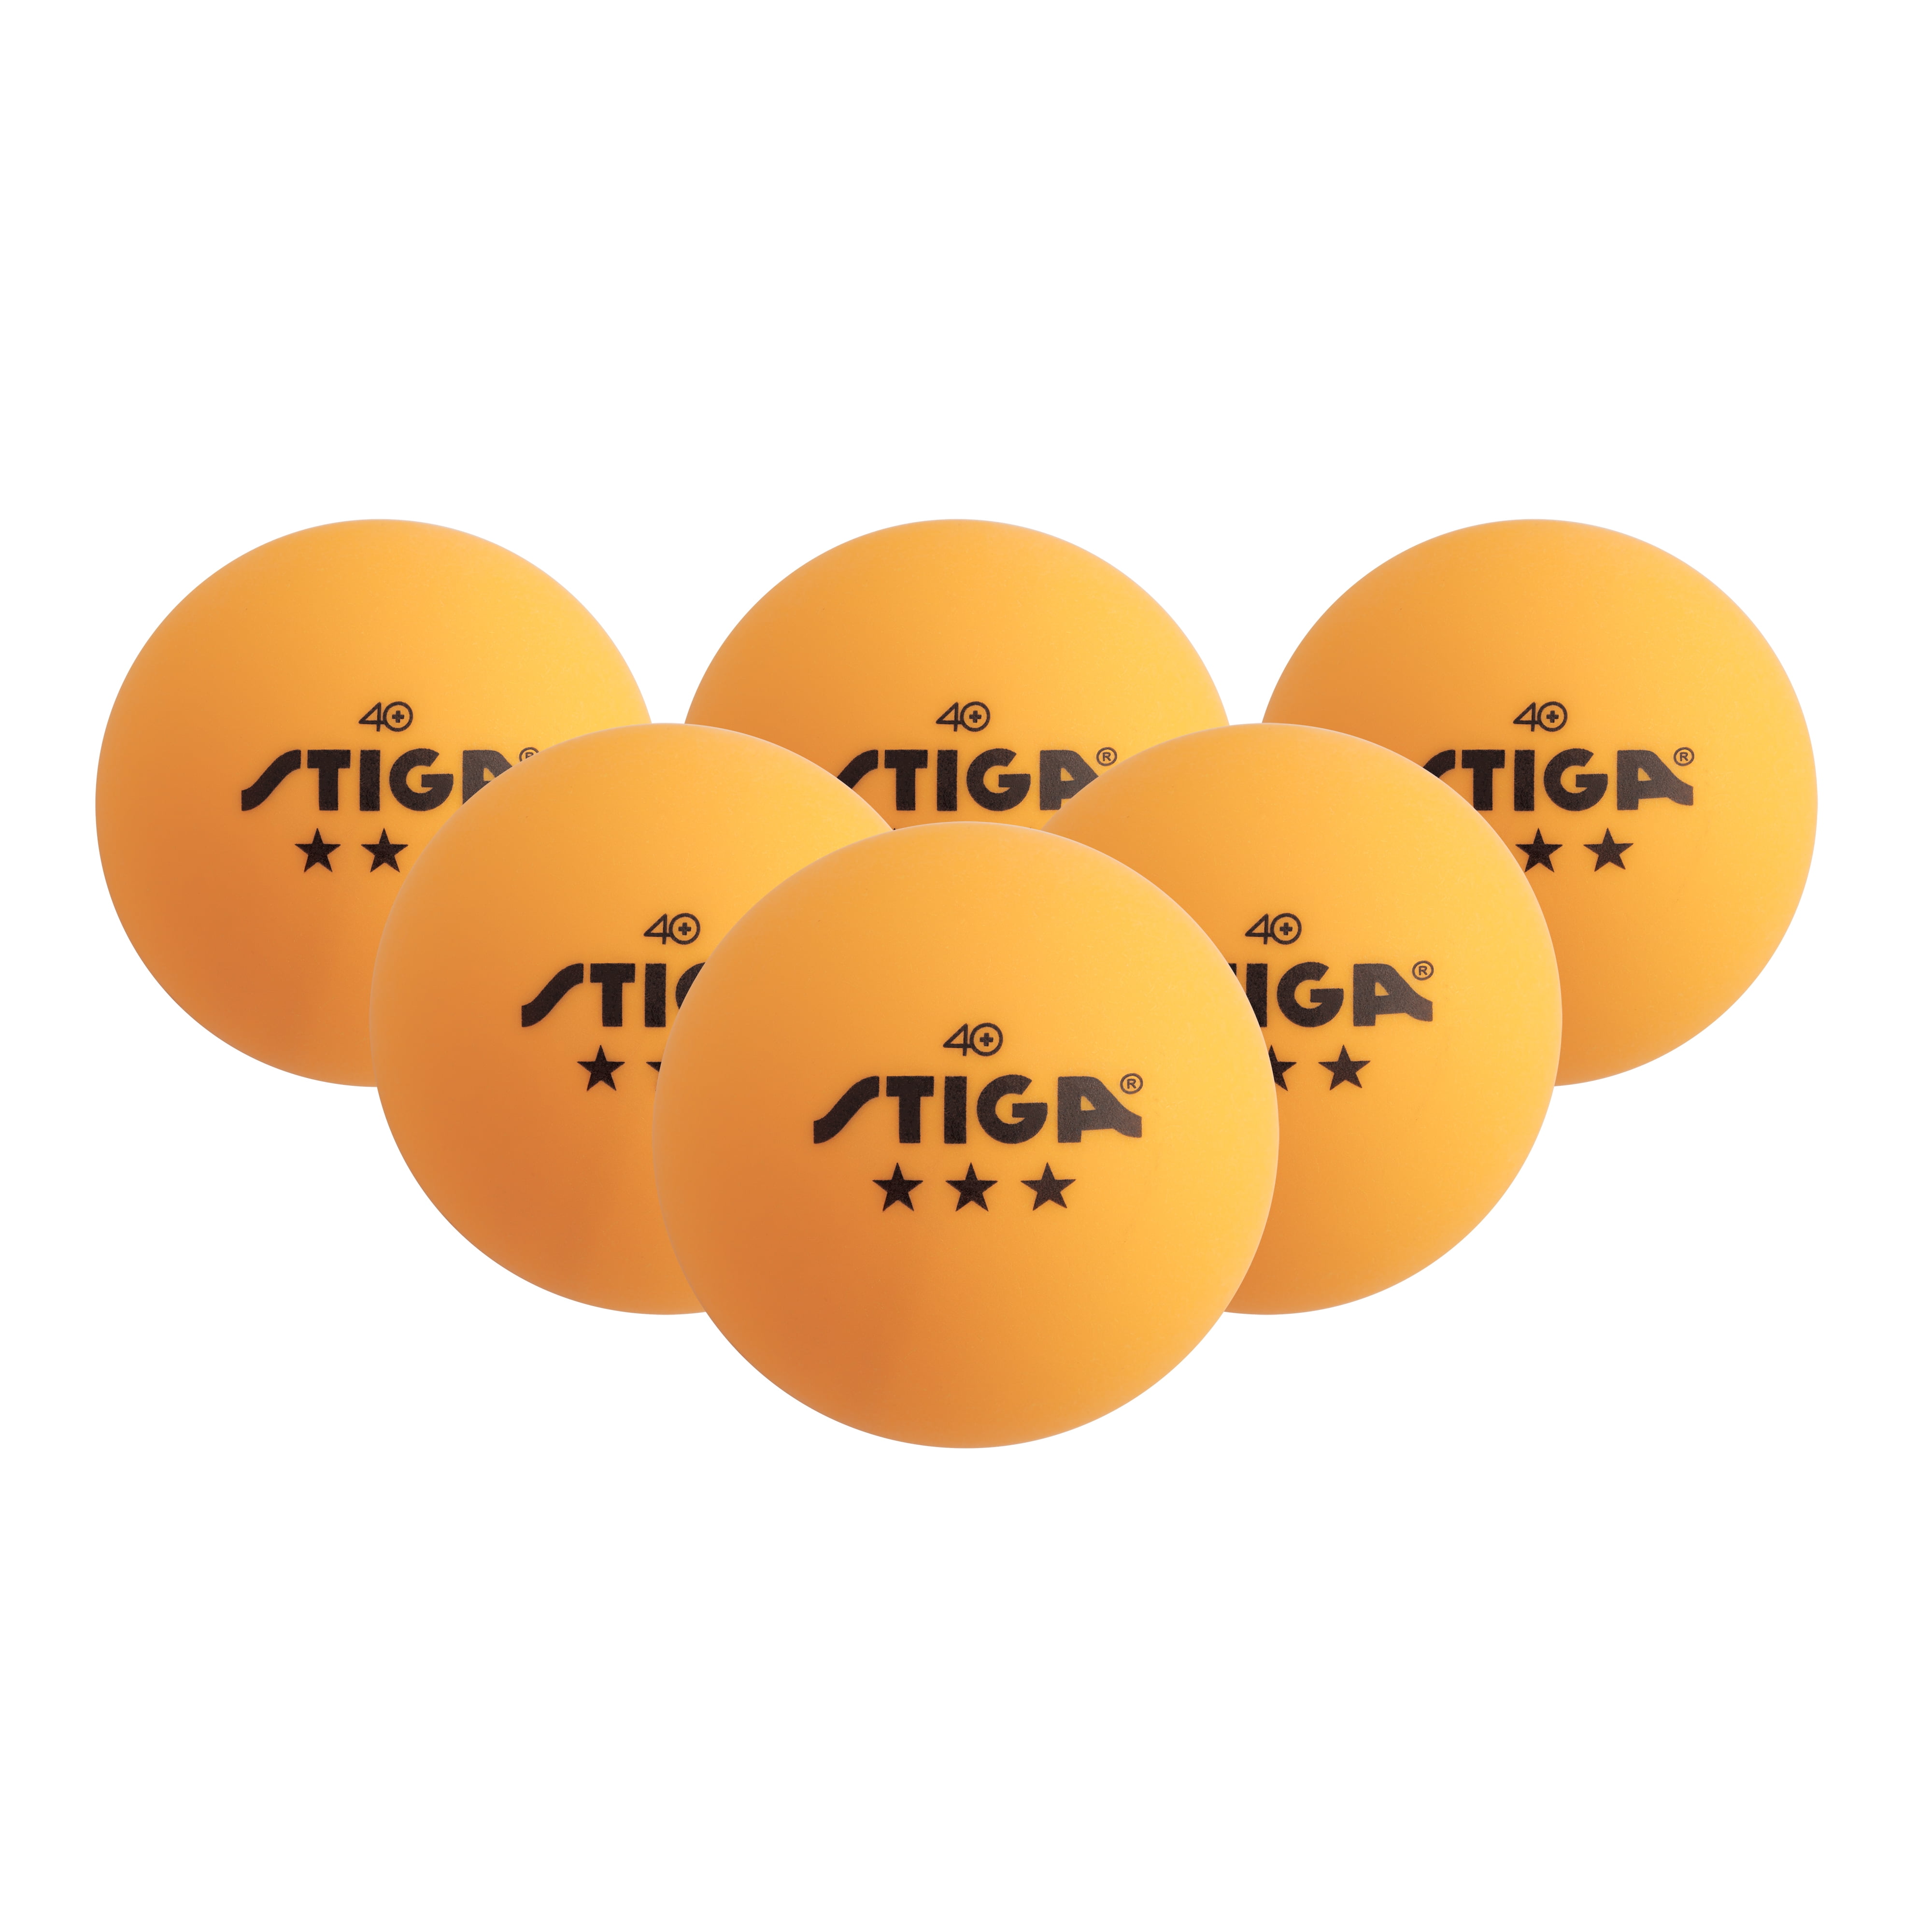 3 Star Table Tennis 3 Pieces Balls Orange PingPong Competition Sports Game 44 